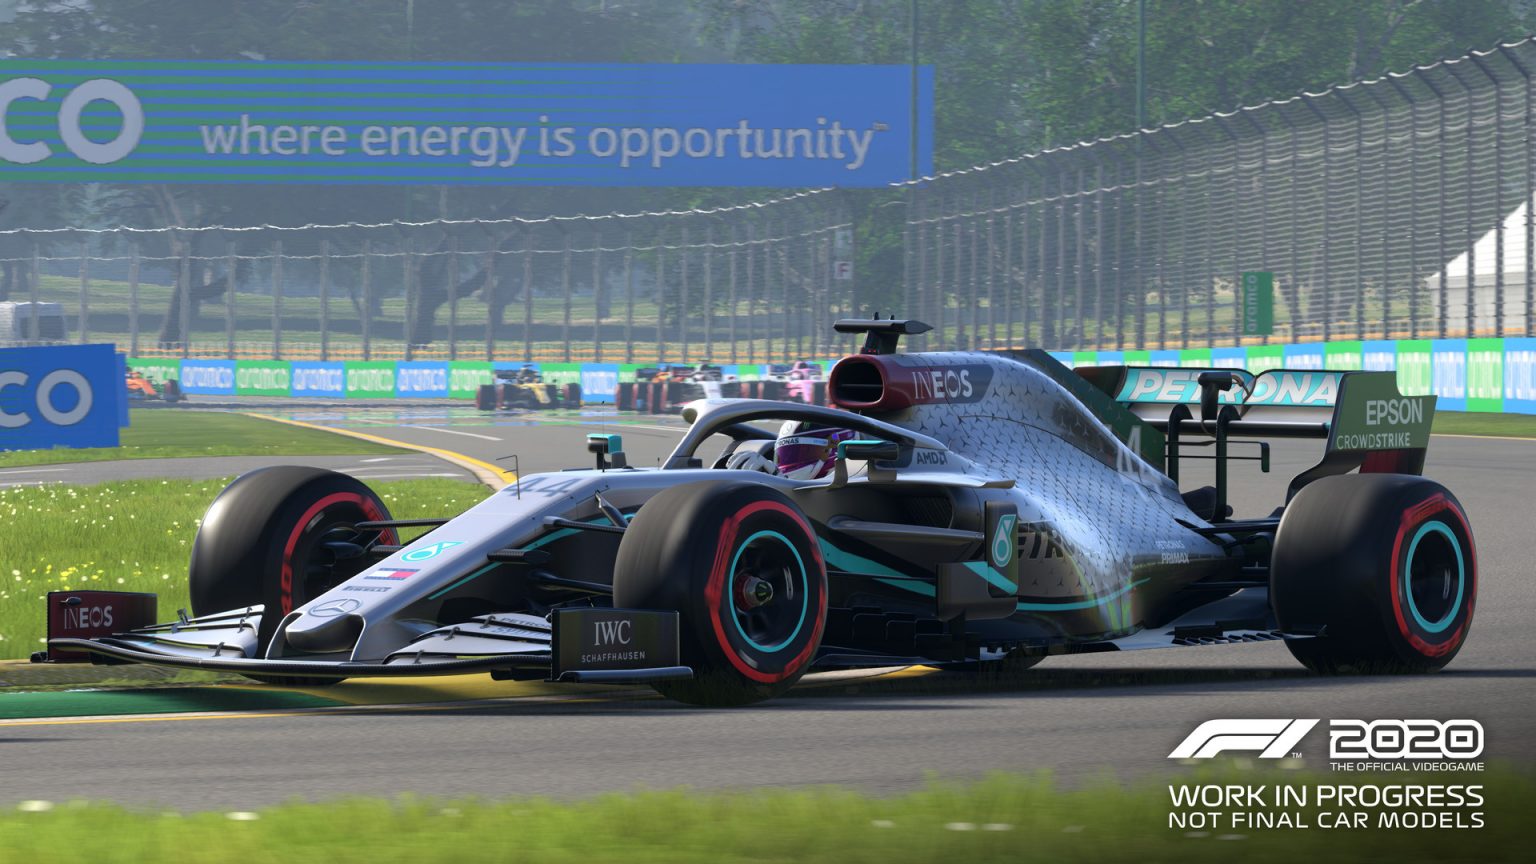 f1 2020 download on pc full game for free crack codex